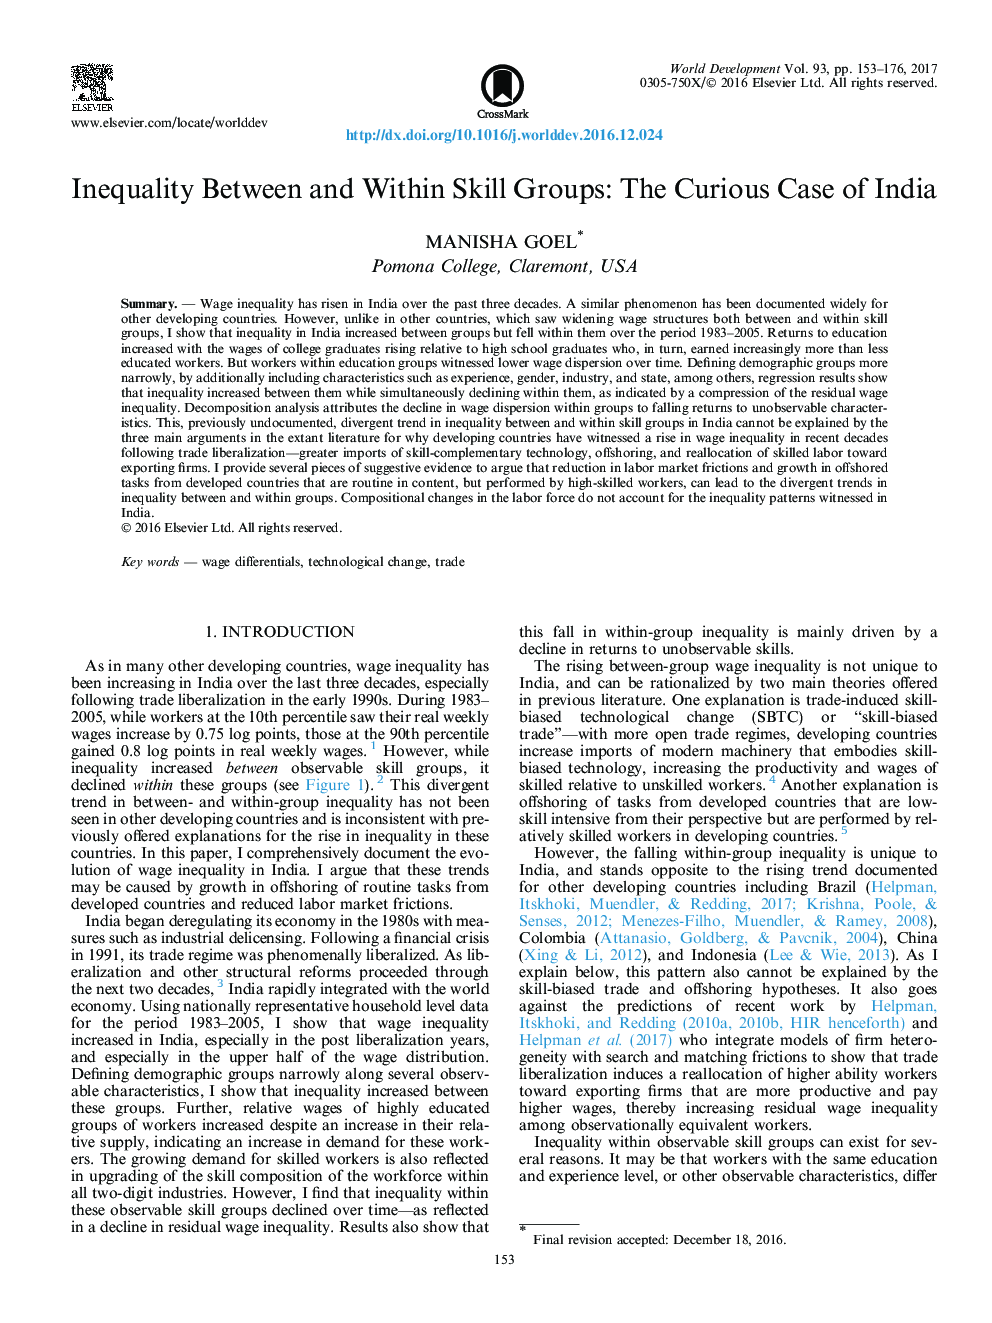 Inequality Between and Within Skill Groups: The Curious Case of India